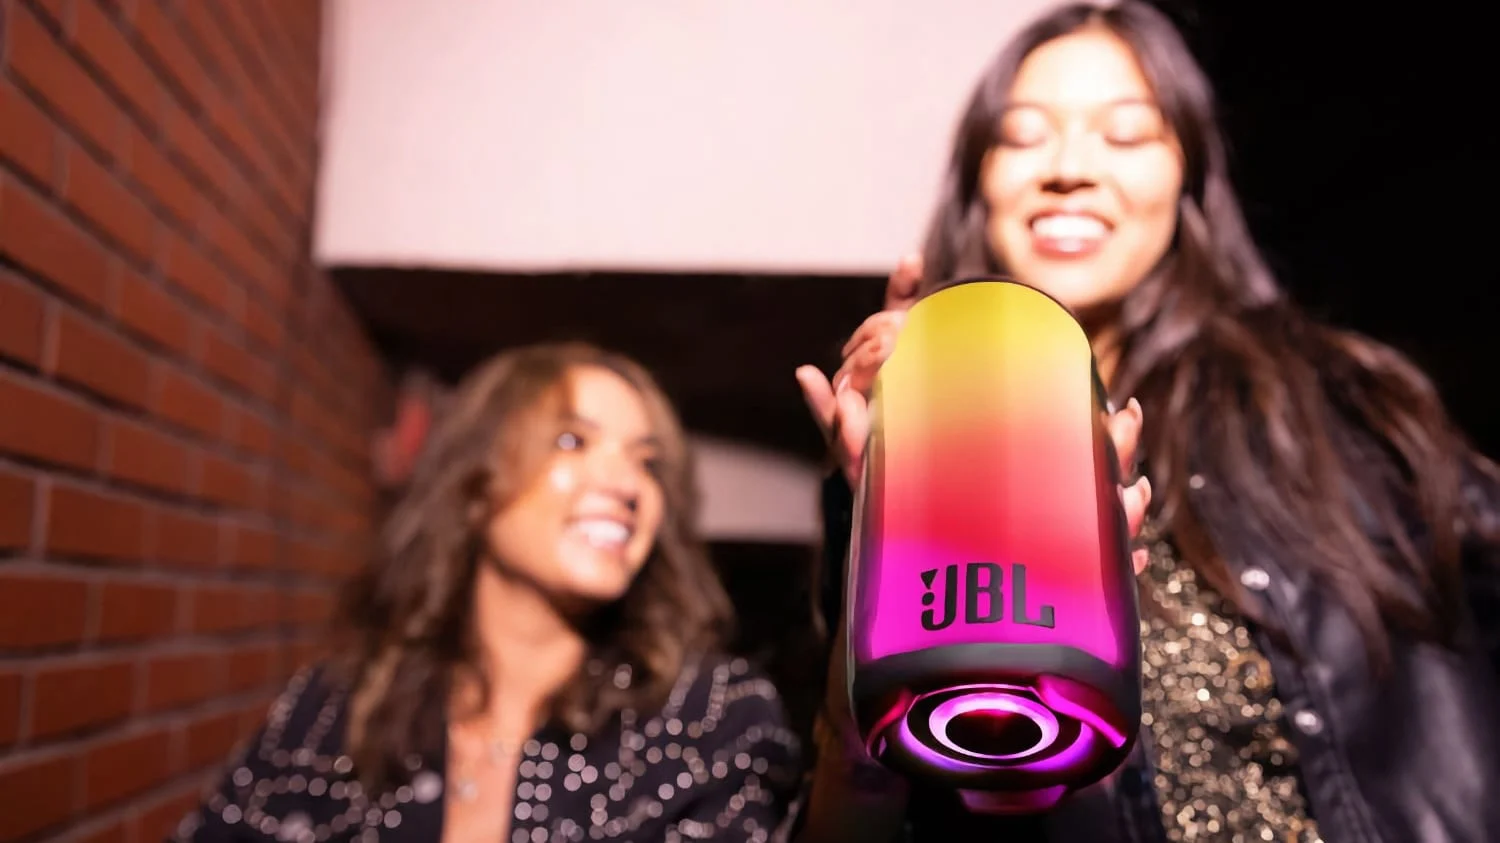 Two women smiling as they listen to the JBL Pulse 5 speaker with its colorful display.